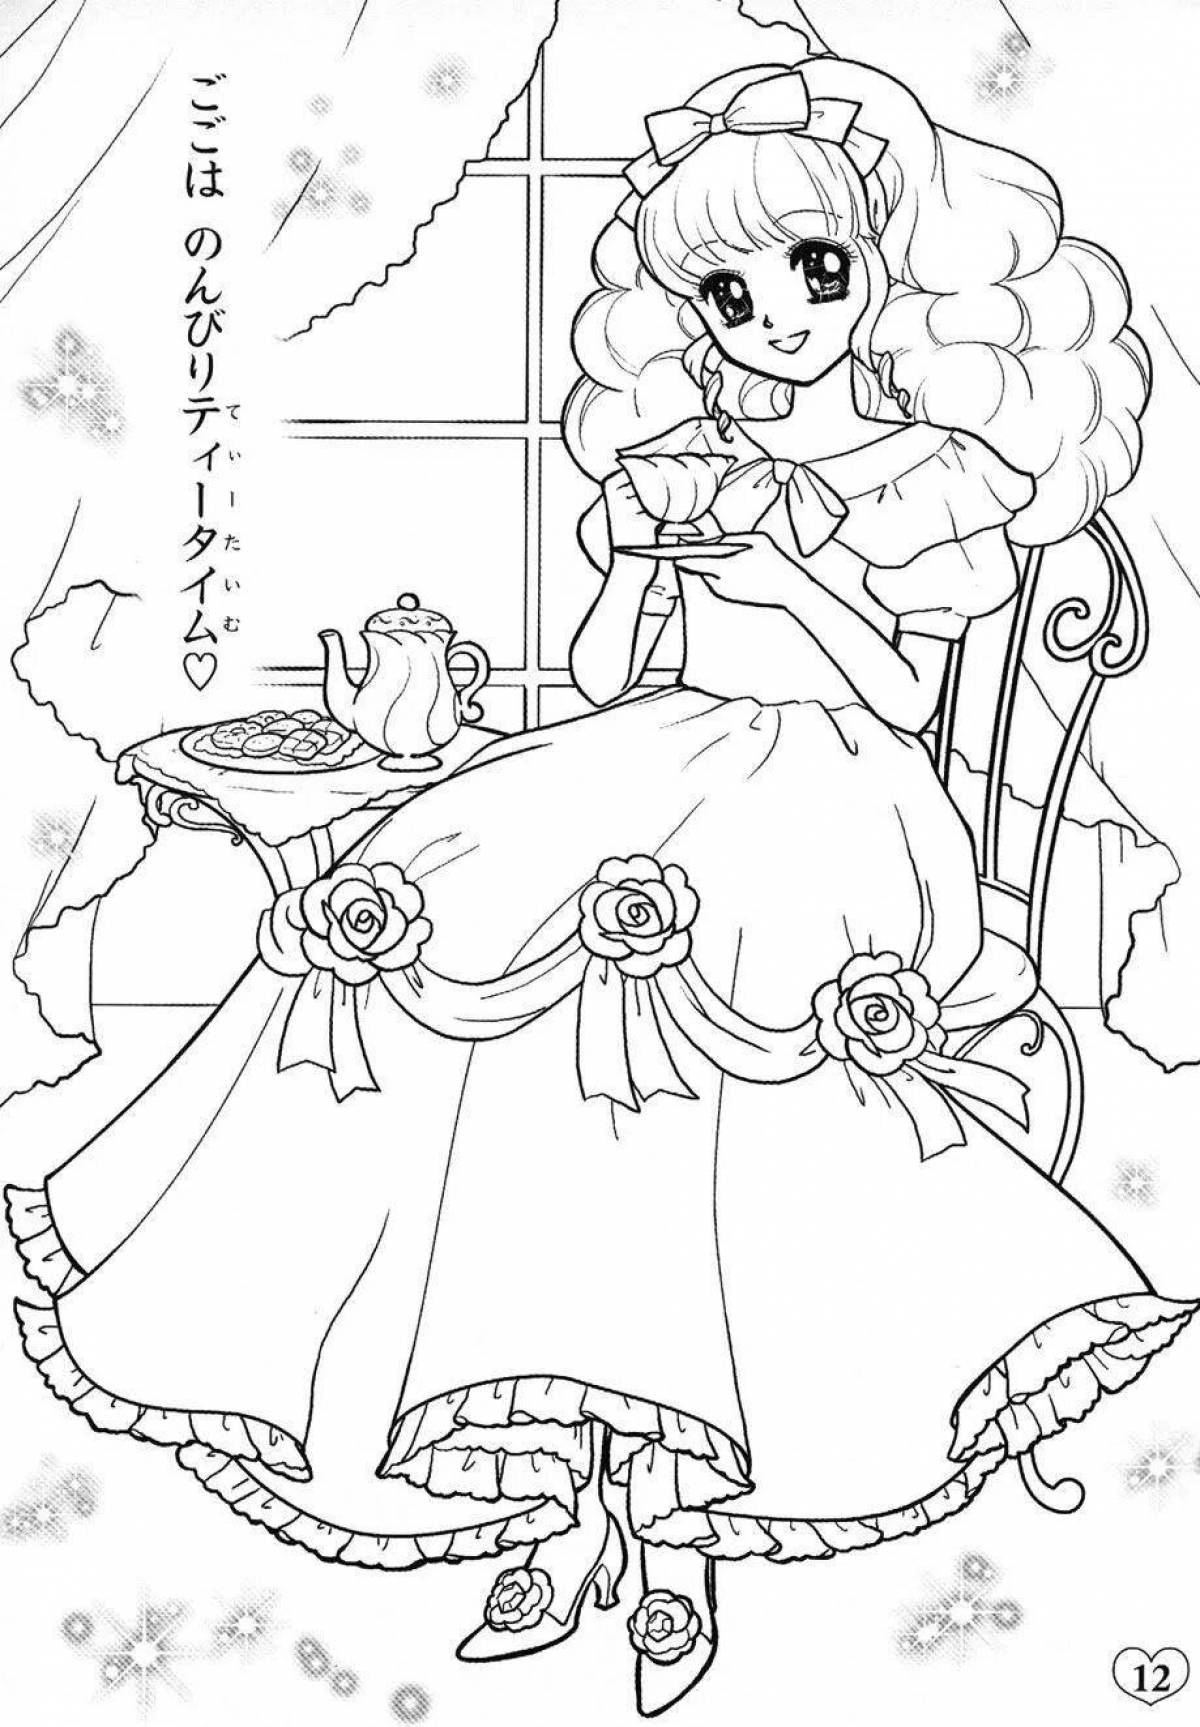 Adorable sissy princess coloring page